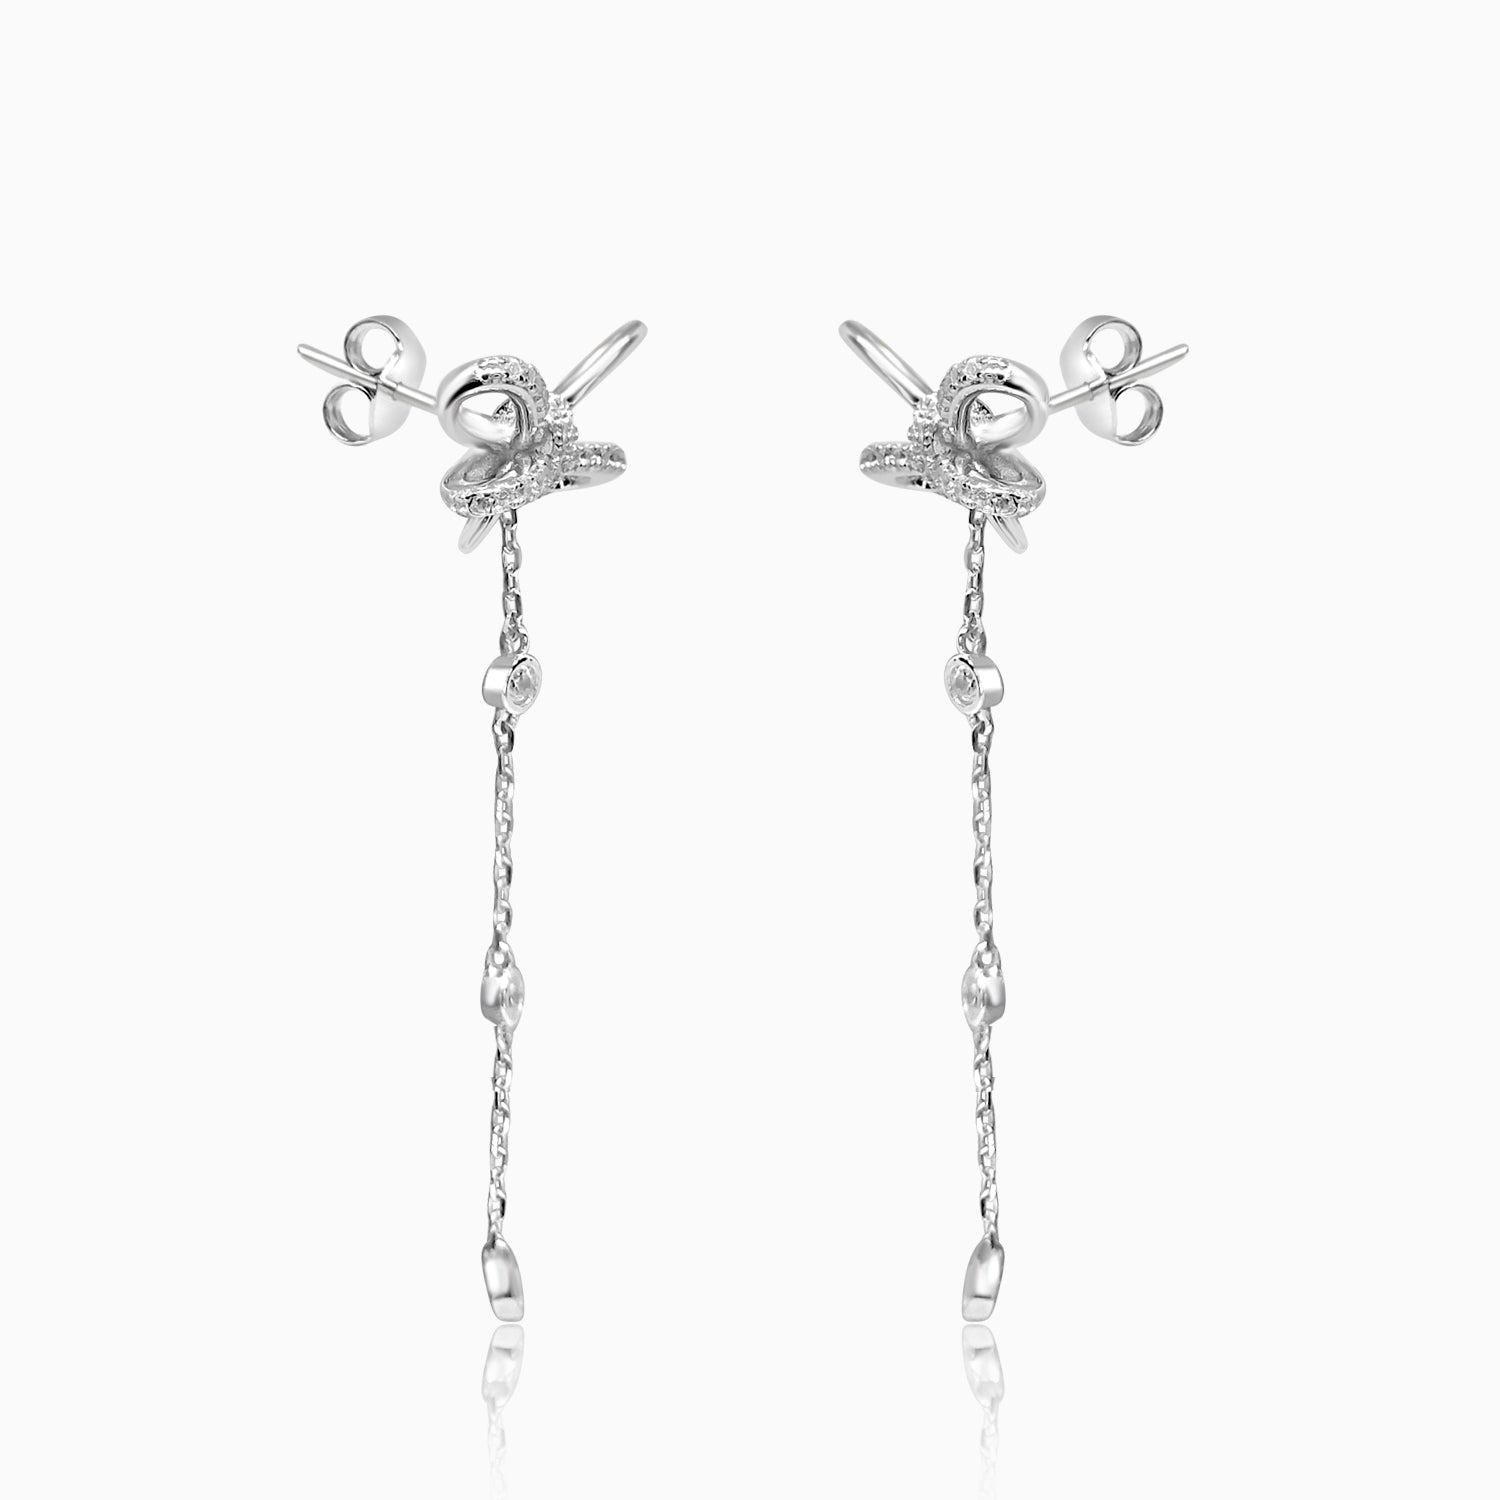 Silver Sparkling Bow Linked Dangling Chain Earrings